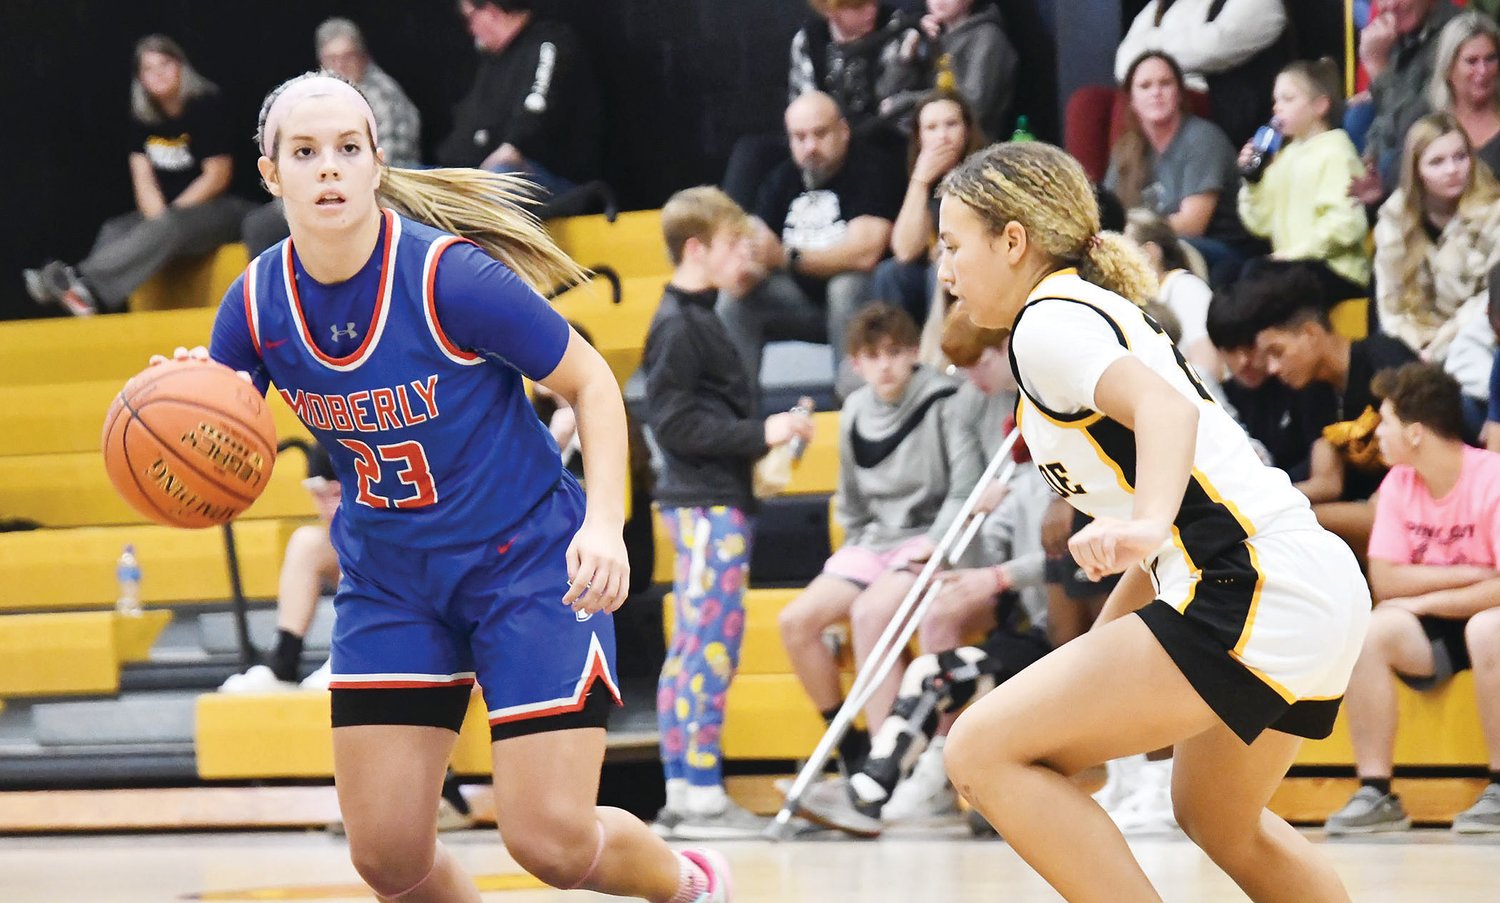 Kennedy Messer (23) dribbles into the front court during the second half of Monday's game between Moberly and Monroe City.